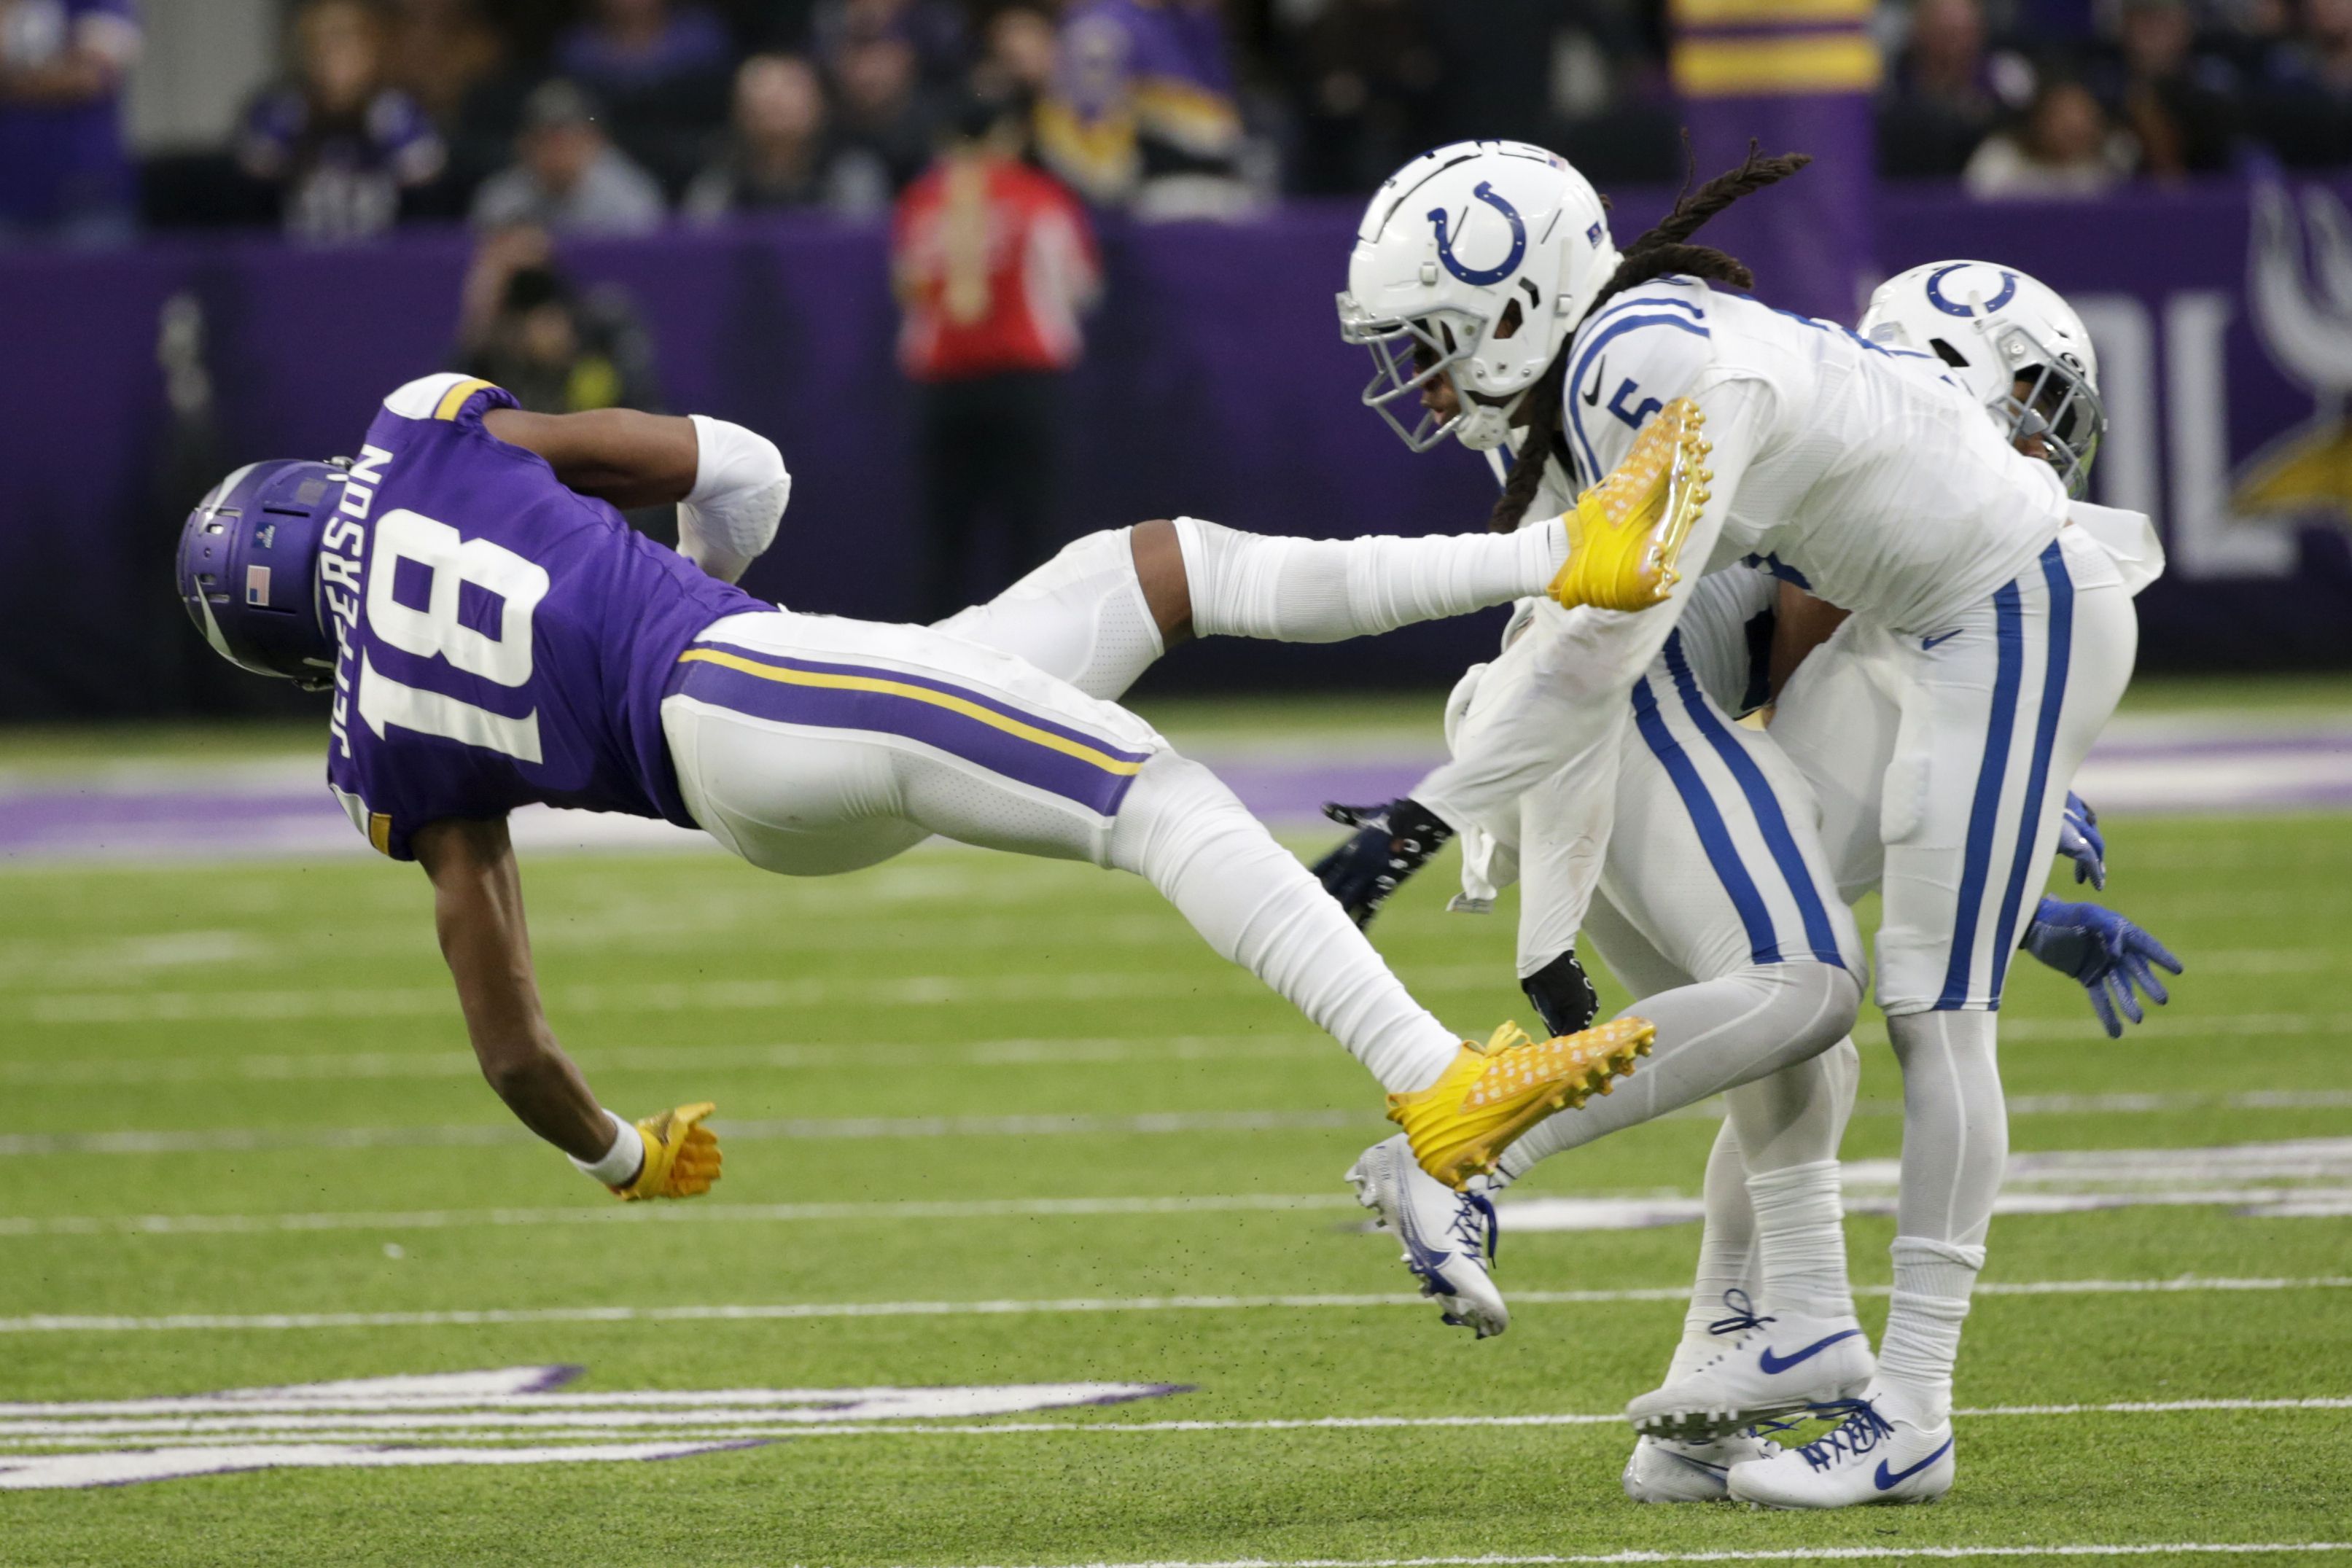 Vikings set an NFL record with Saturday's win vs. Giants